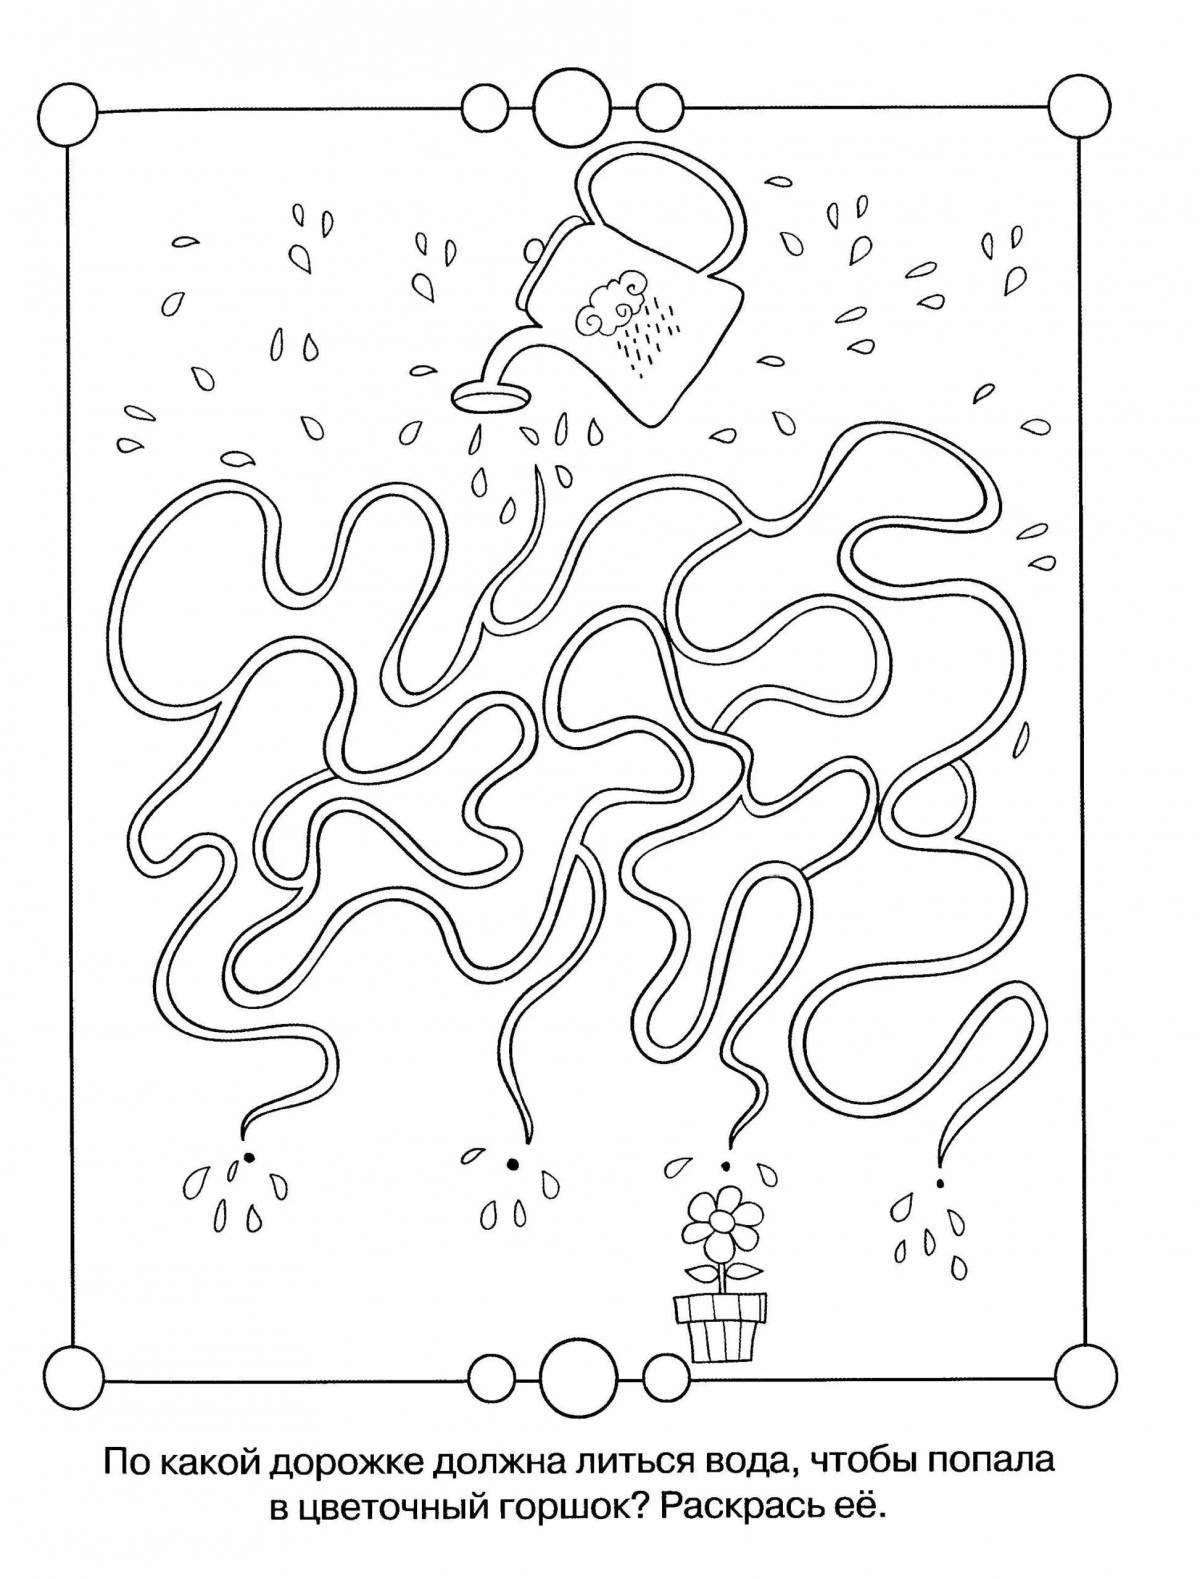 Playful coloring book for kids